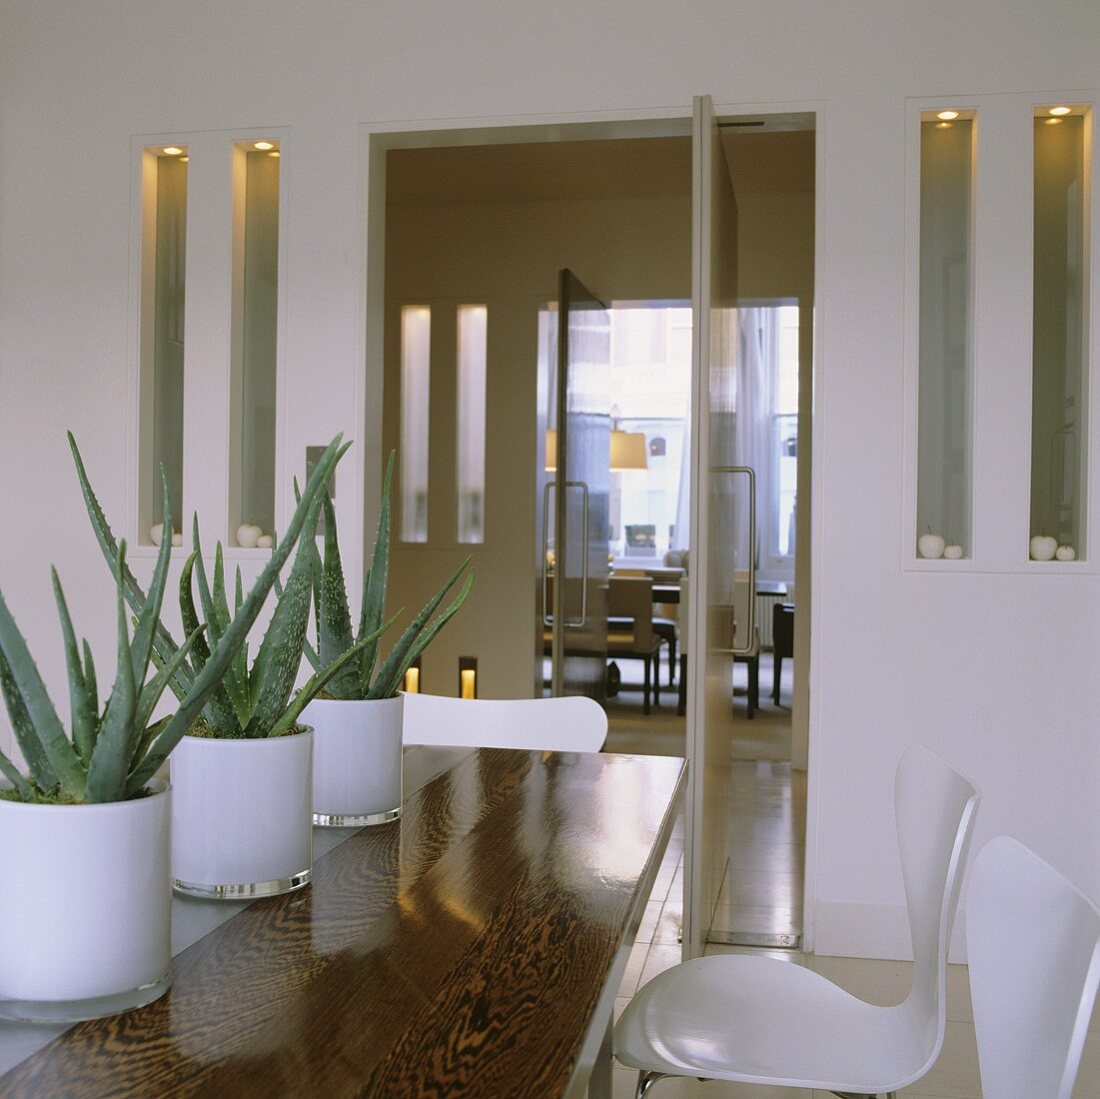 A row of cacti in white glass pots on a wooden table and wall niches either side of the open door with a view of a dining room